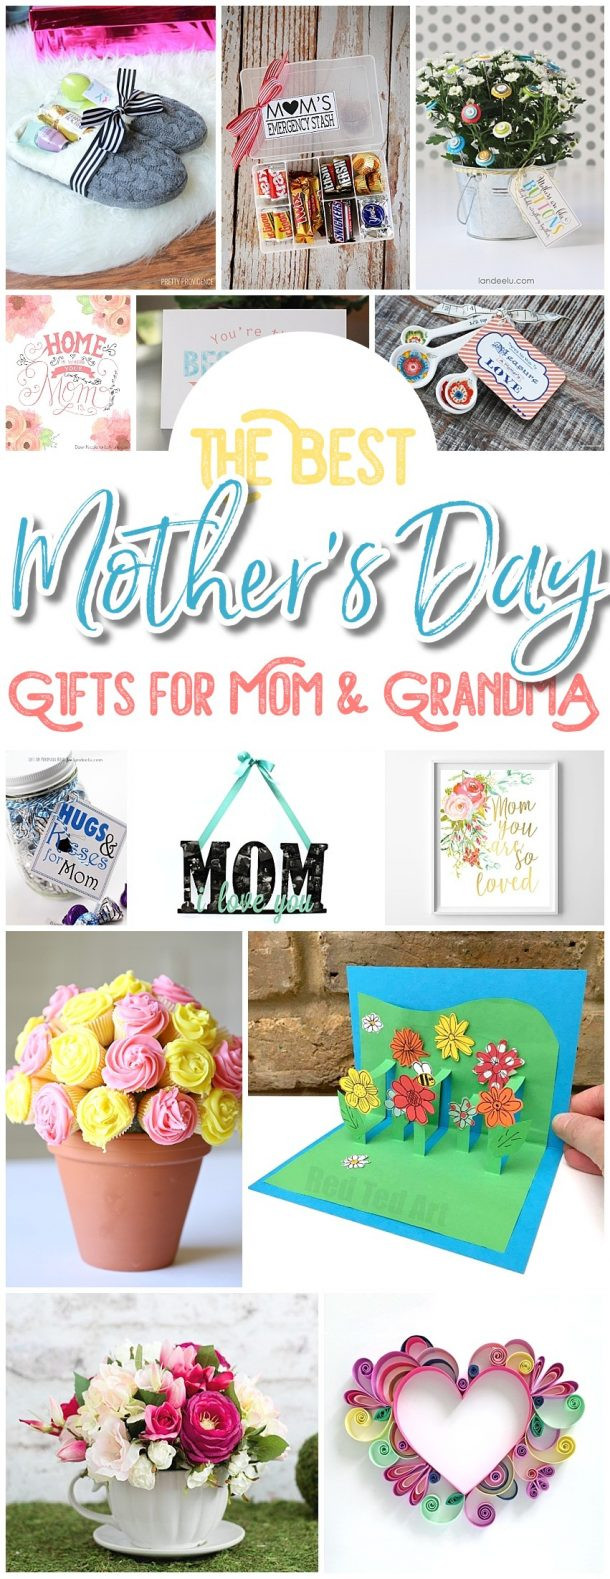 Easy DIY Mothers Day Gifts
 The BEST Easy DIY Mother’s Day Gifts and Treats Ideas